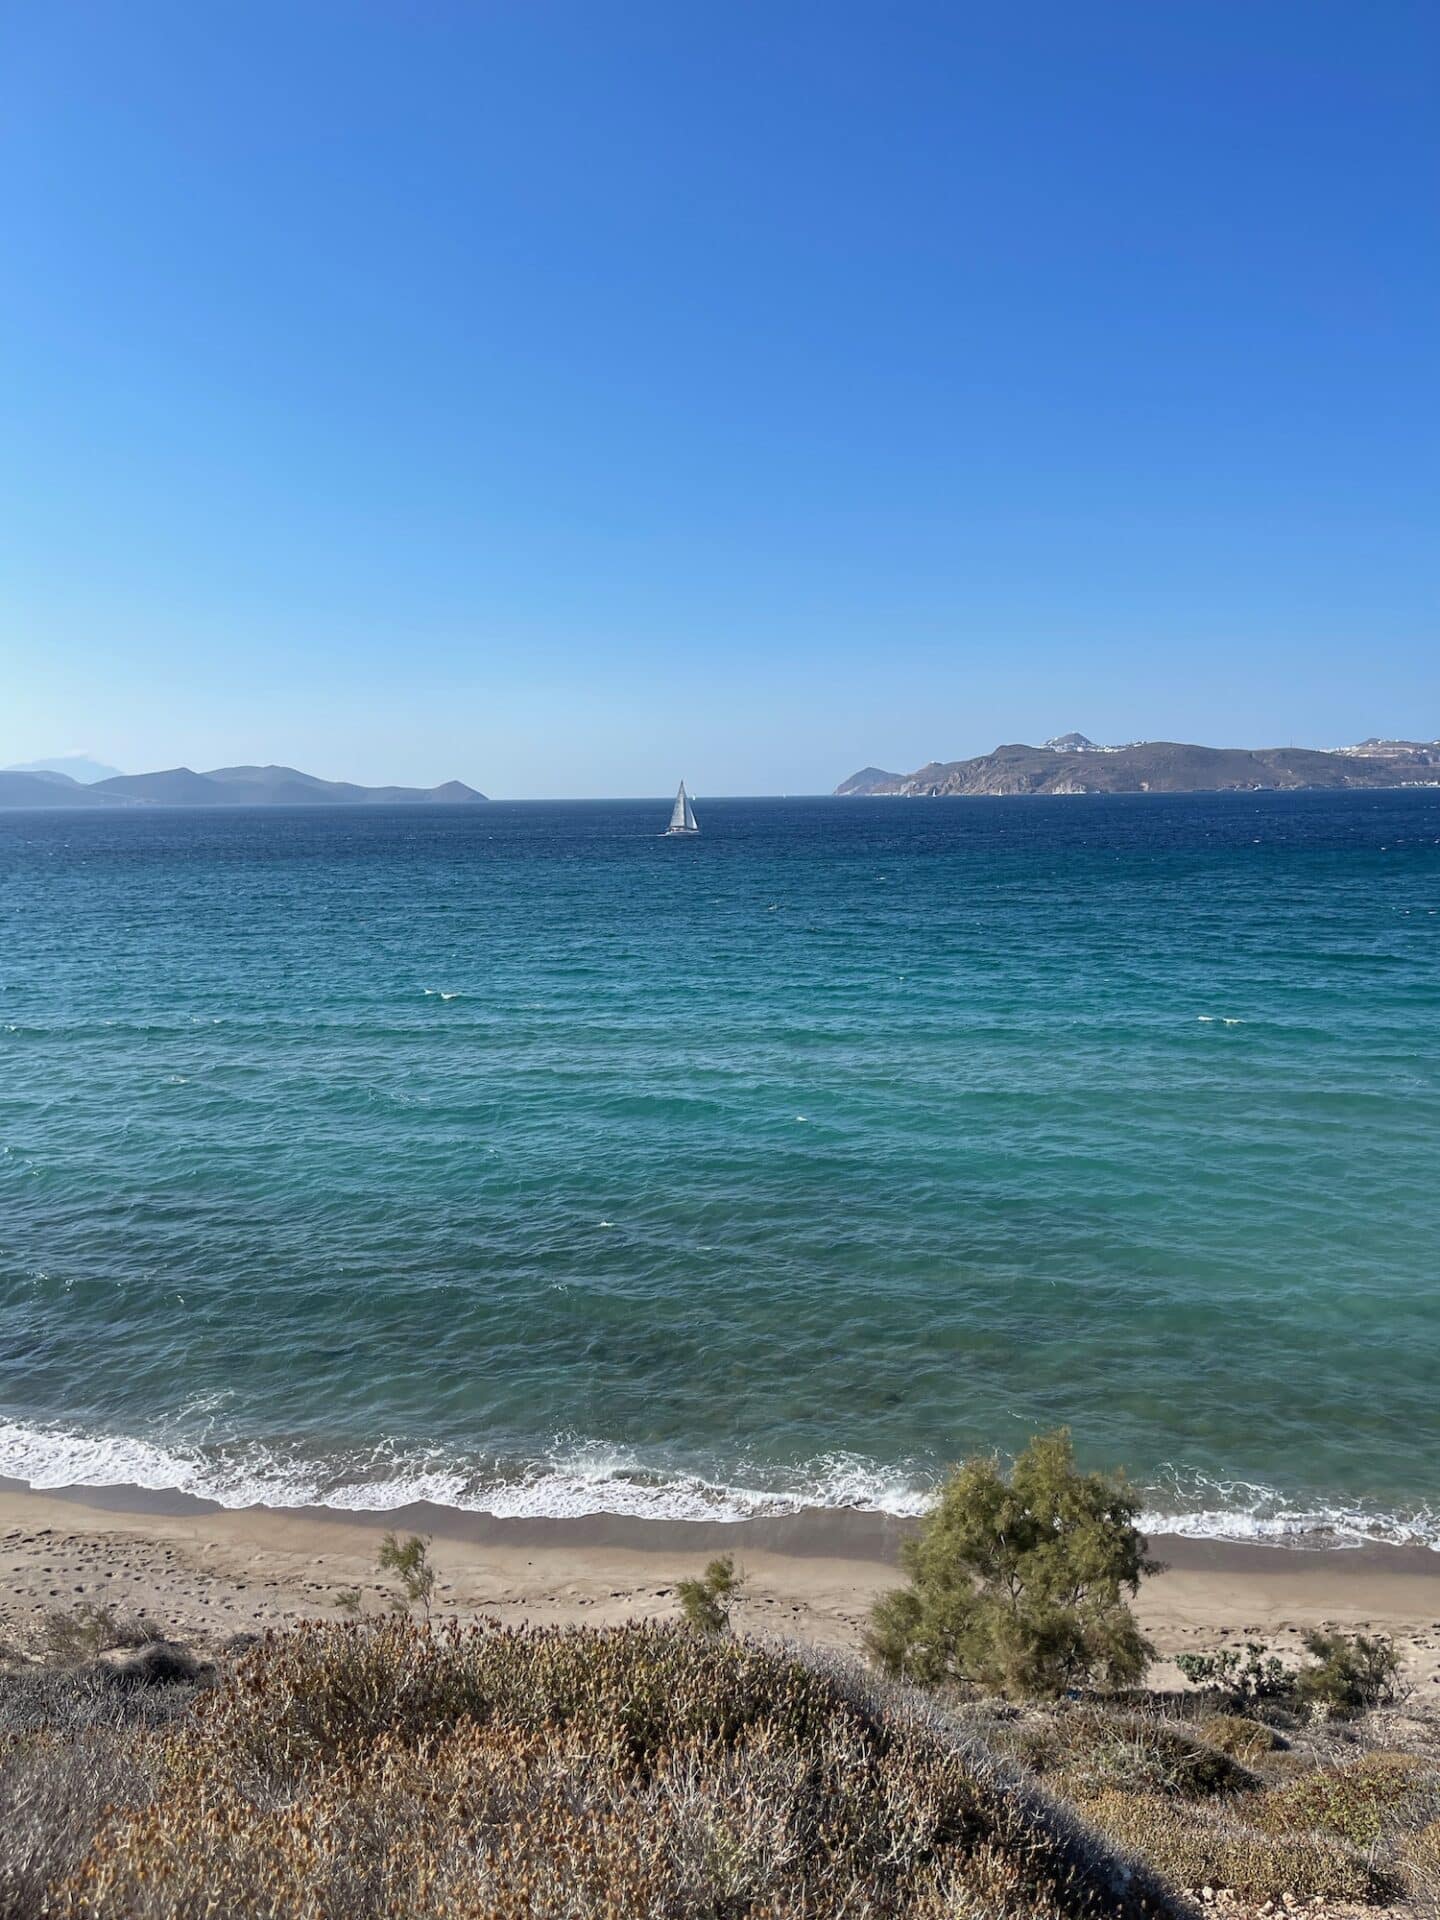 A scenic view of a sandy beach in Milos, overlooking a calm sea with a single sailboat in the distance, and mountainous terrain under a clear blue sky.